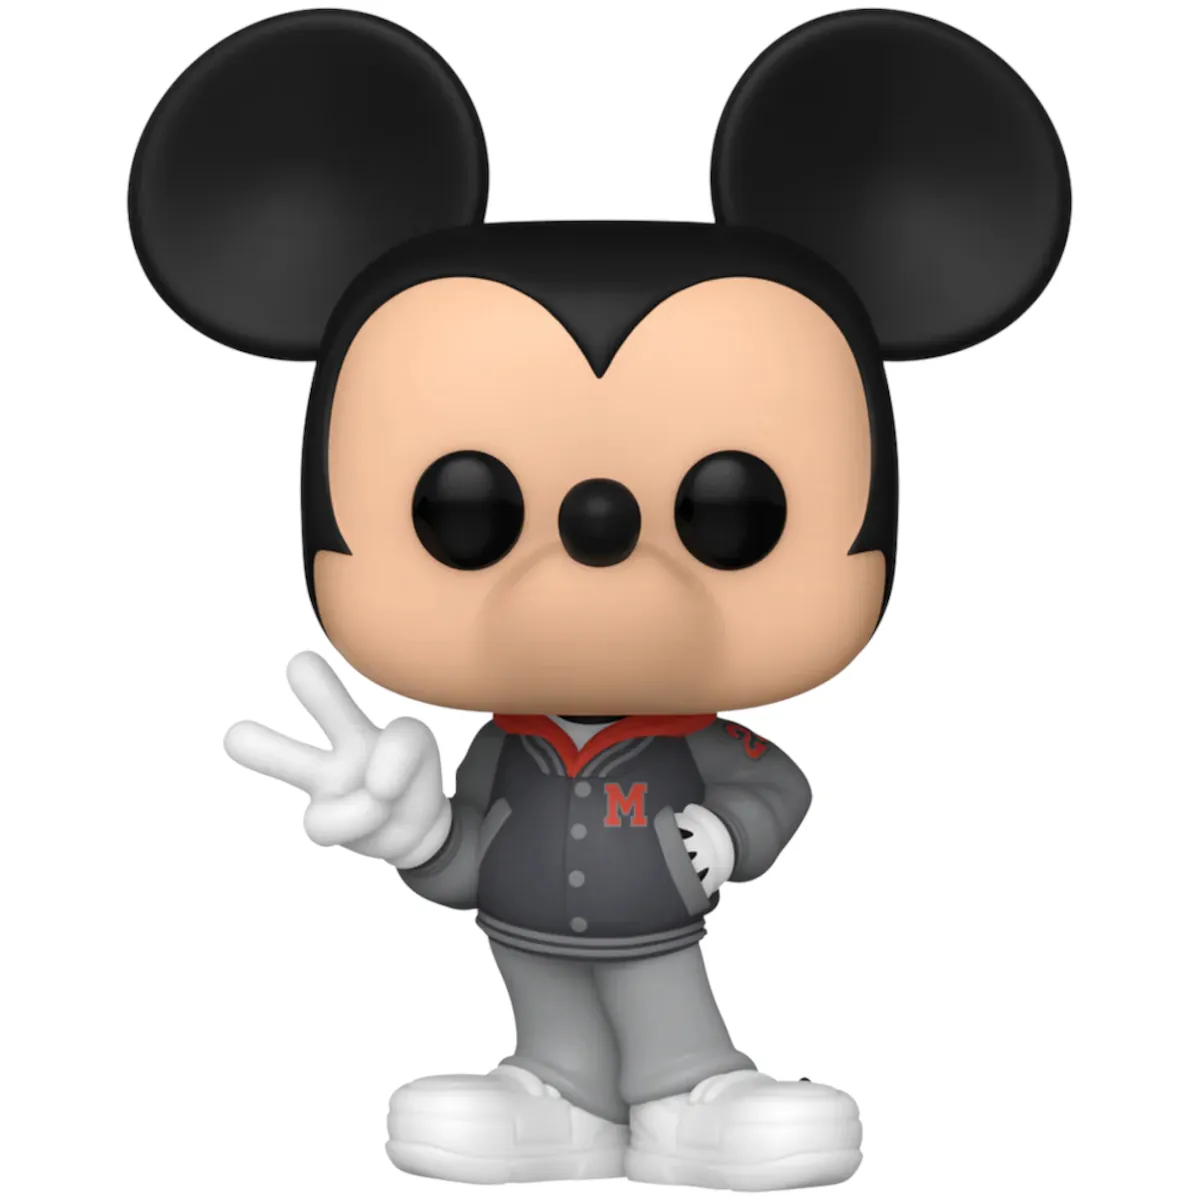 82689 Funko Pop! Disney - Mickey & Friends - Mickey Mouse Collectable Vinyl Figure